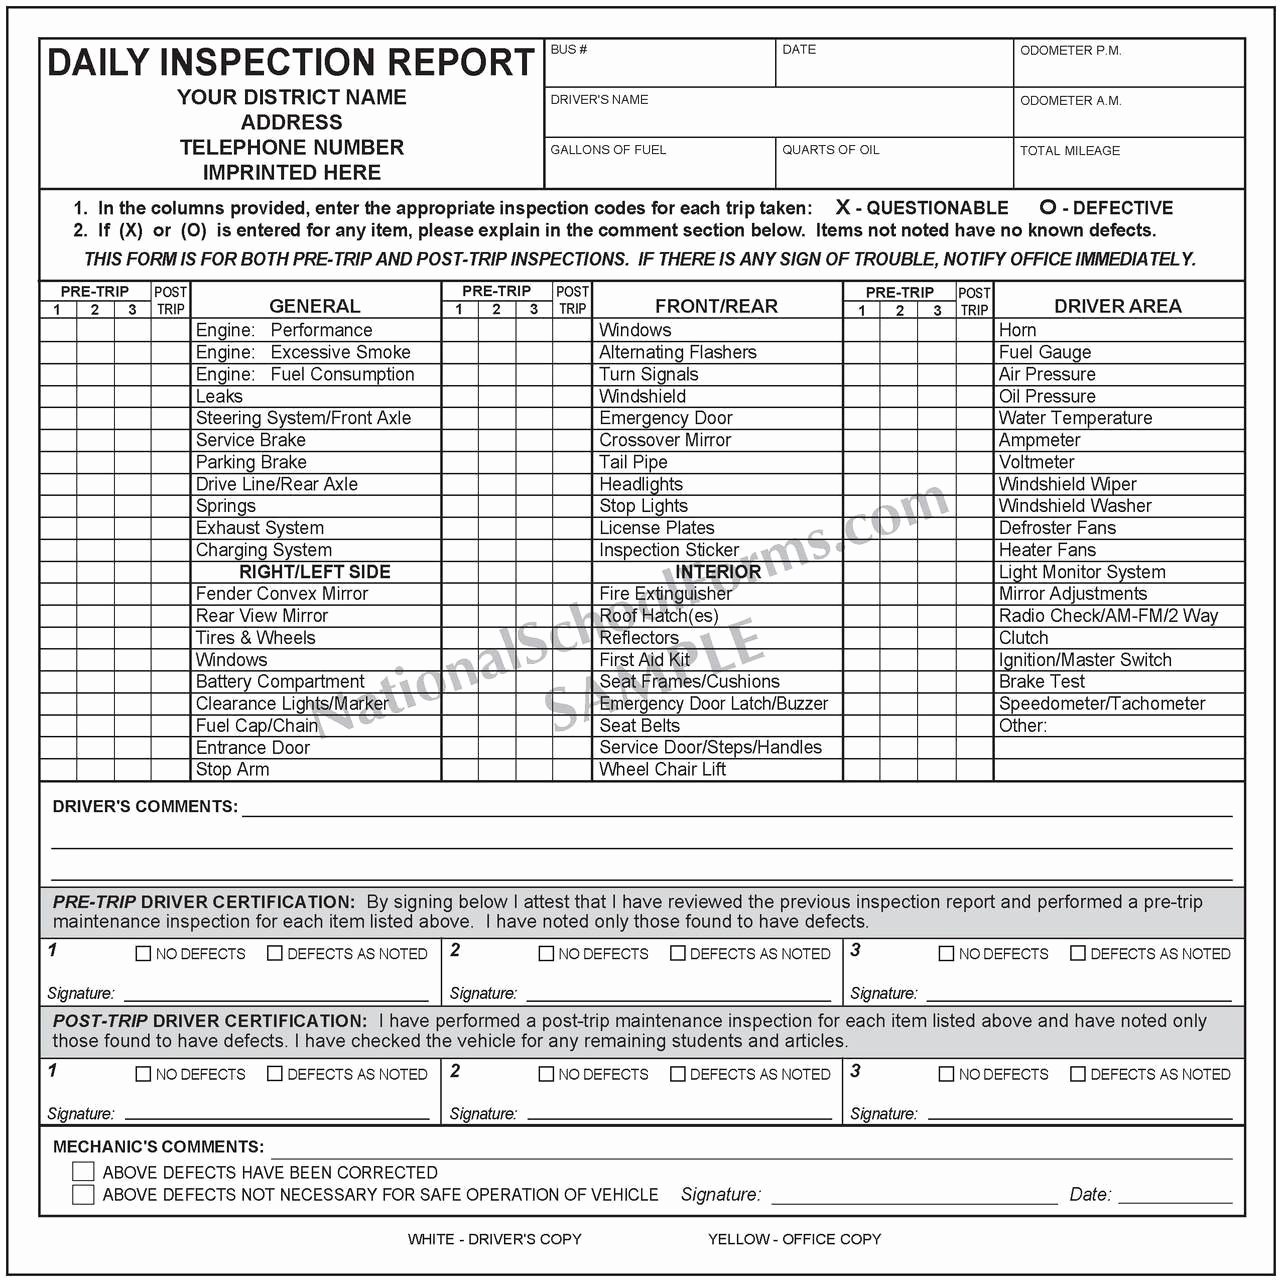 Daily Vehicle Inspection Report Template Fresh Daily Inspection Report with Pre and Post Trip